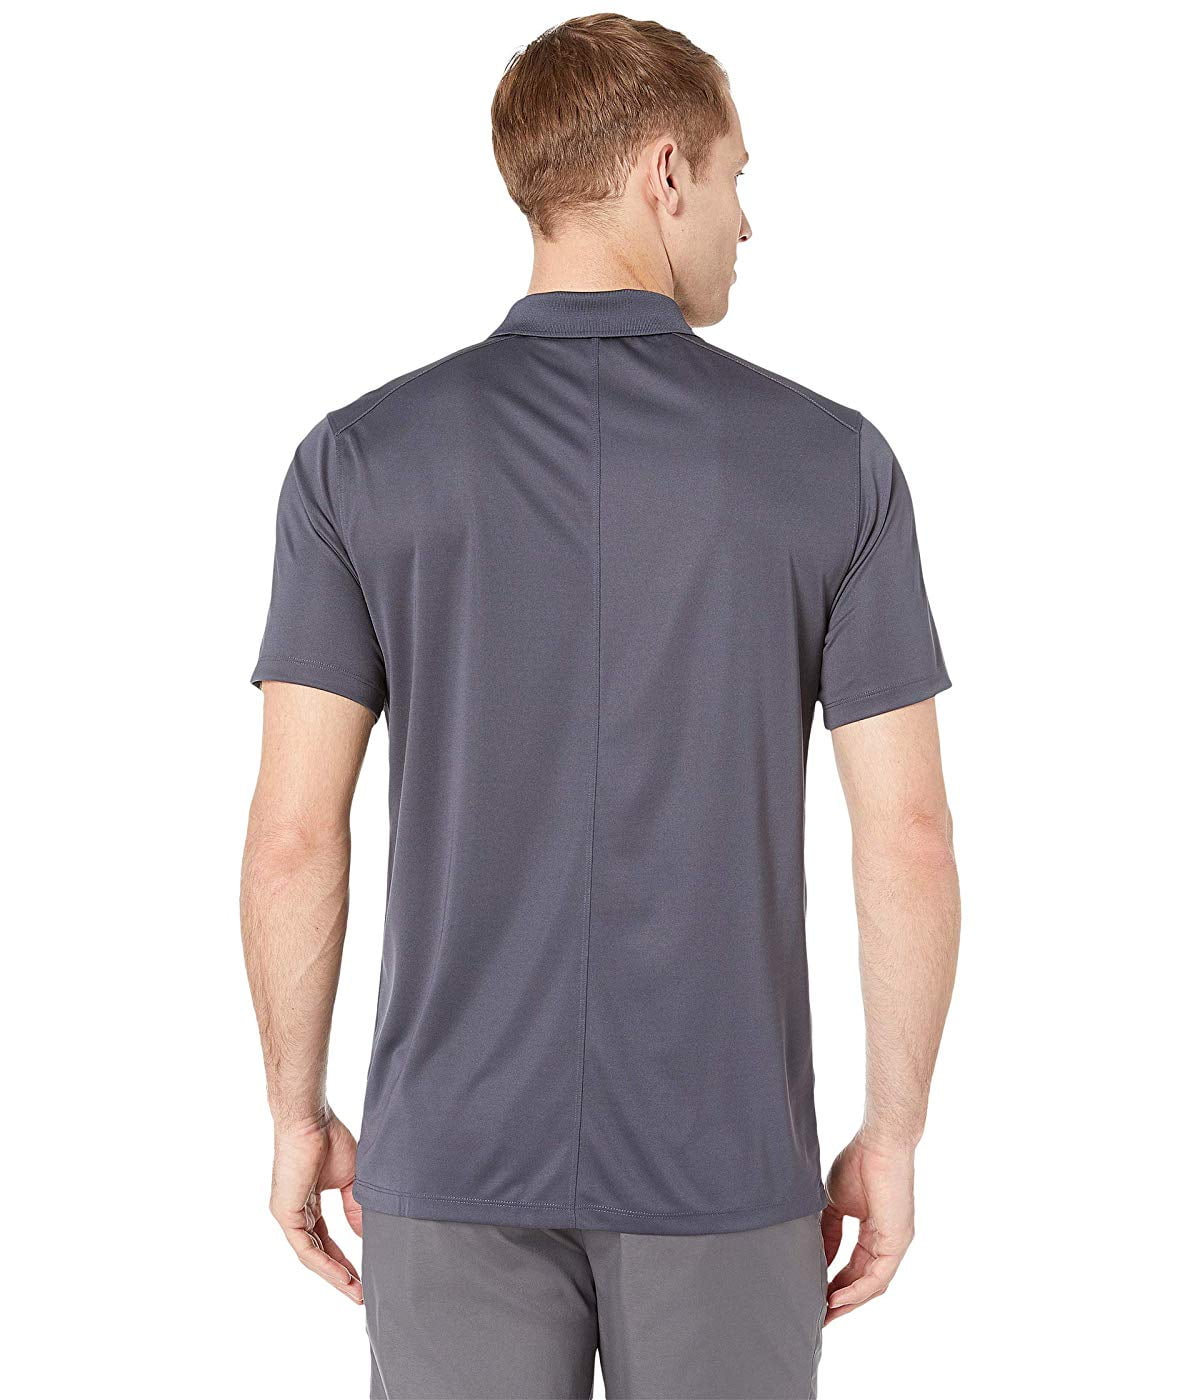 nike men's solid dry victory golf polo